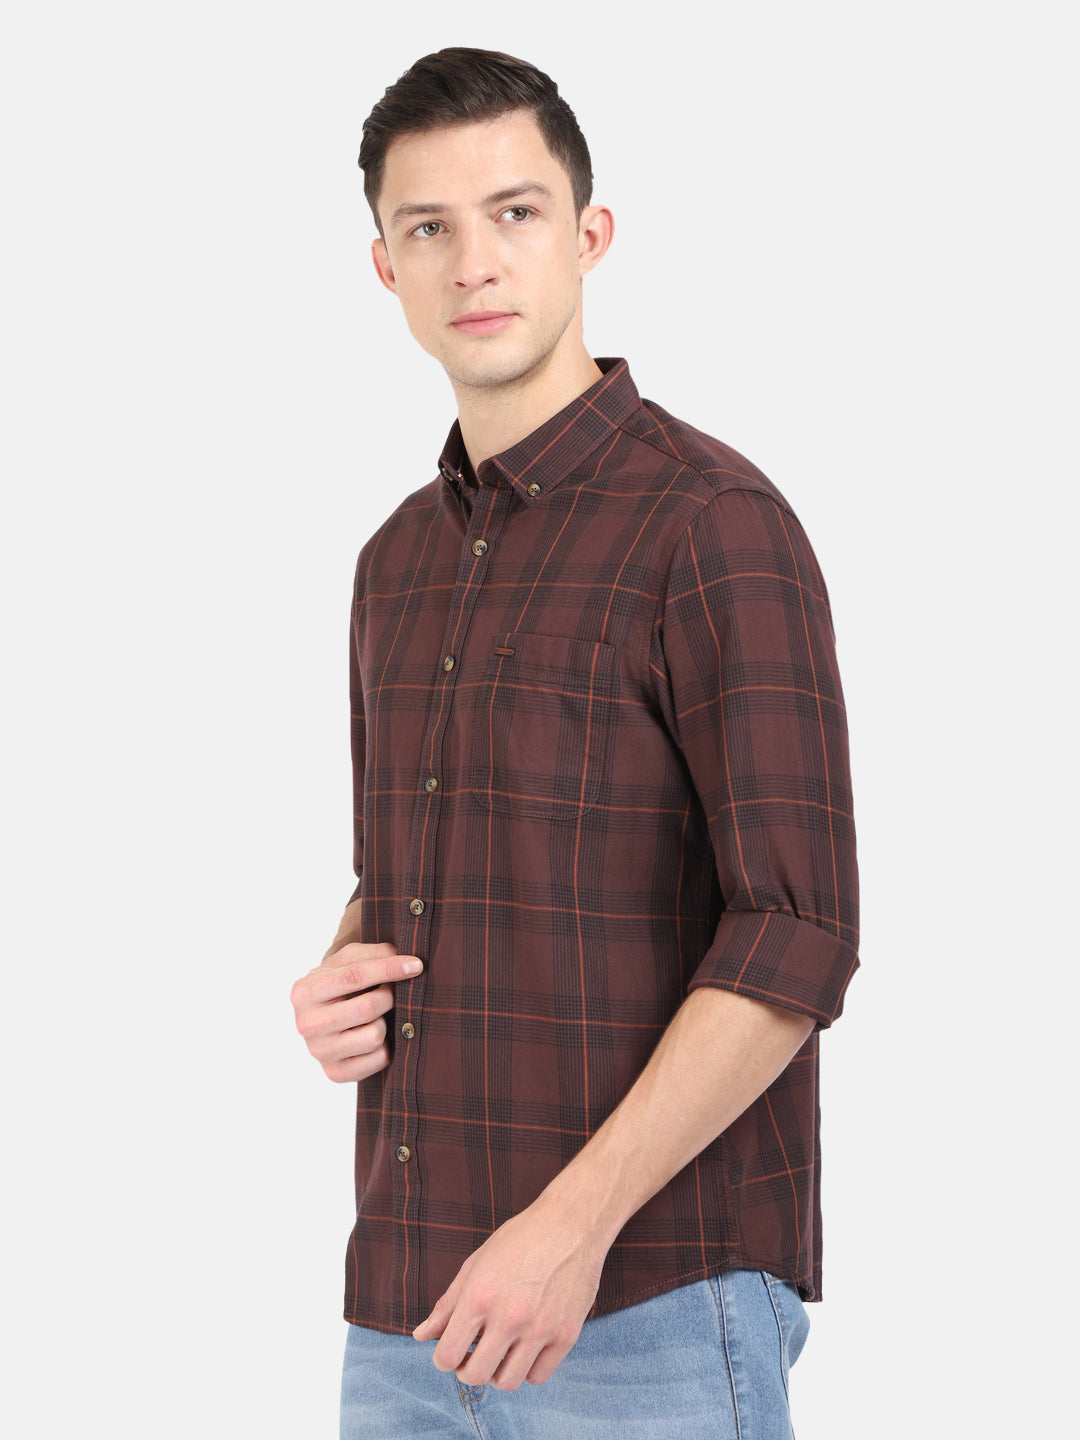 Crocodile Casual Full Sleeve Slim Fit Checks Brown Navy with Collar Shirt for Men